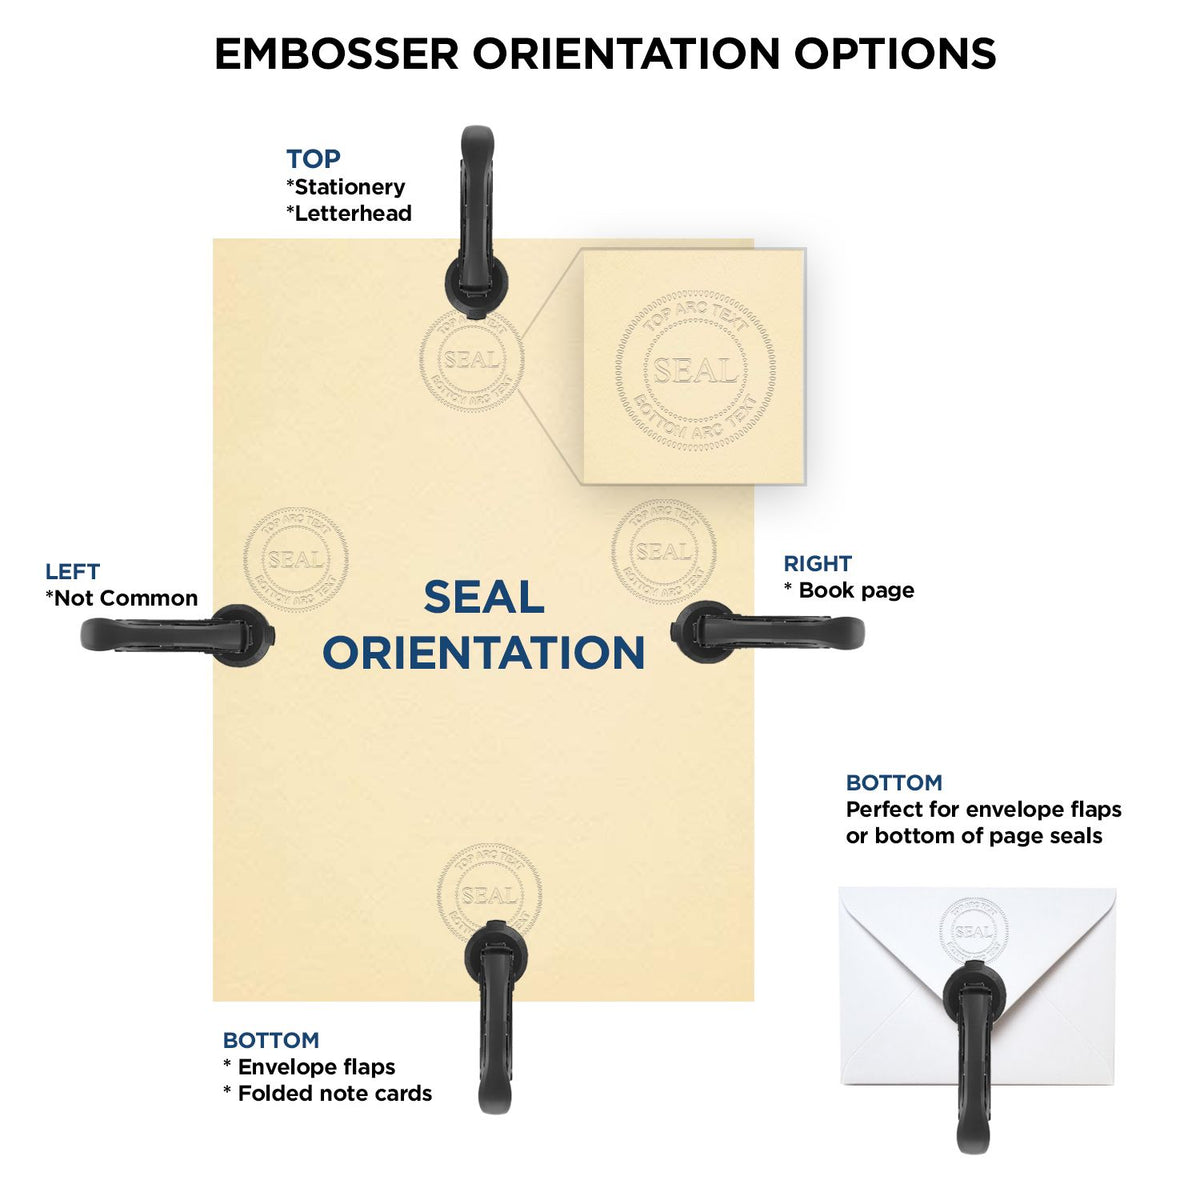 An infographic for the Long Reach Michigan Land Surveyor Seal showing embosser orientation, this is showing examples of a top, bottom, right and left insert.